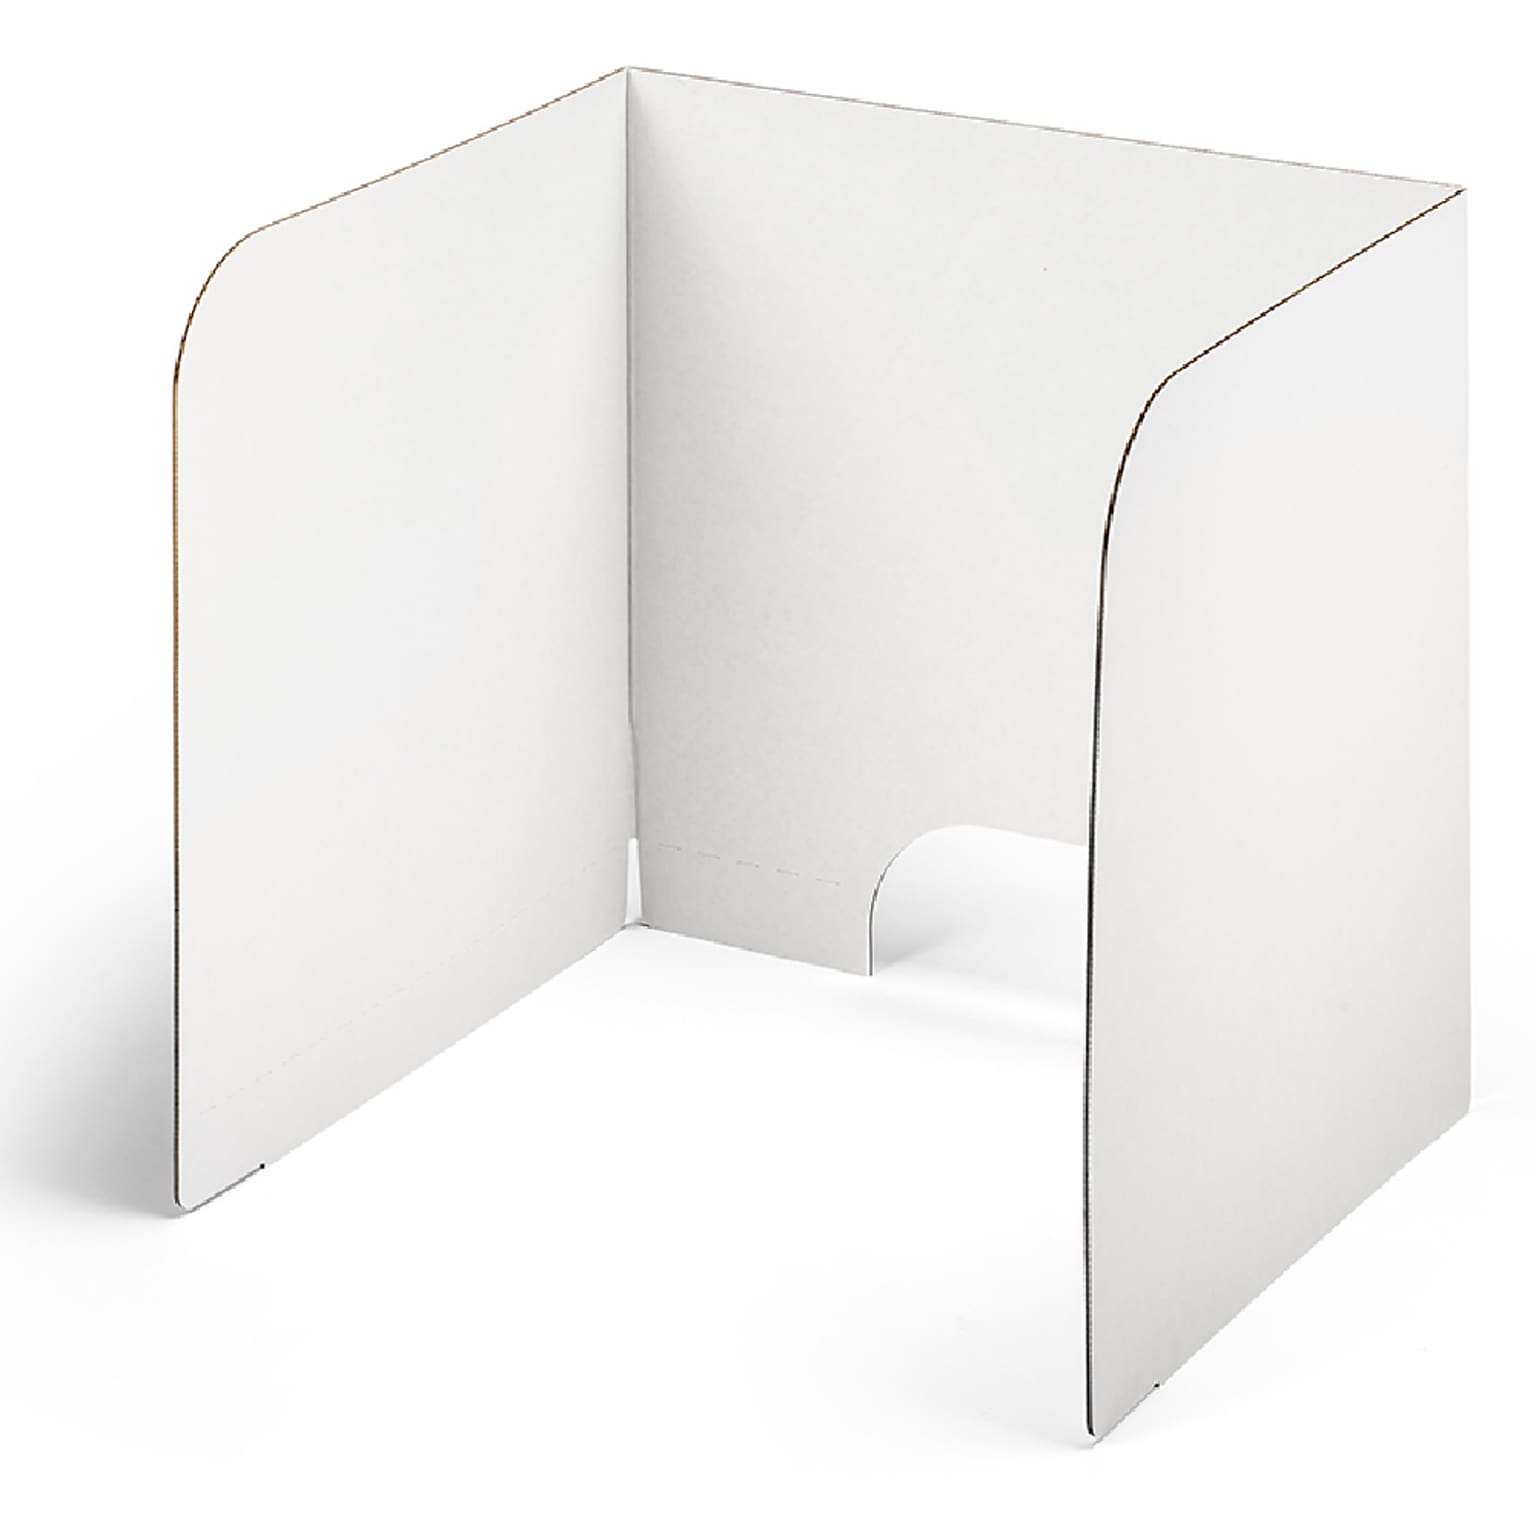 Classroom Products Foldable Cardboard Freestanding Privacy Shield, 20H x 20W, White, 20/Box (2020 WH)